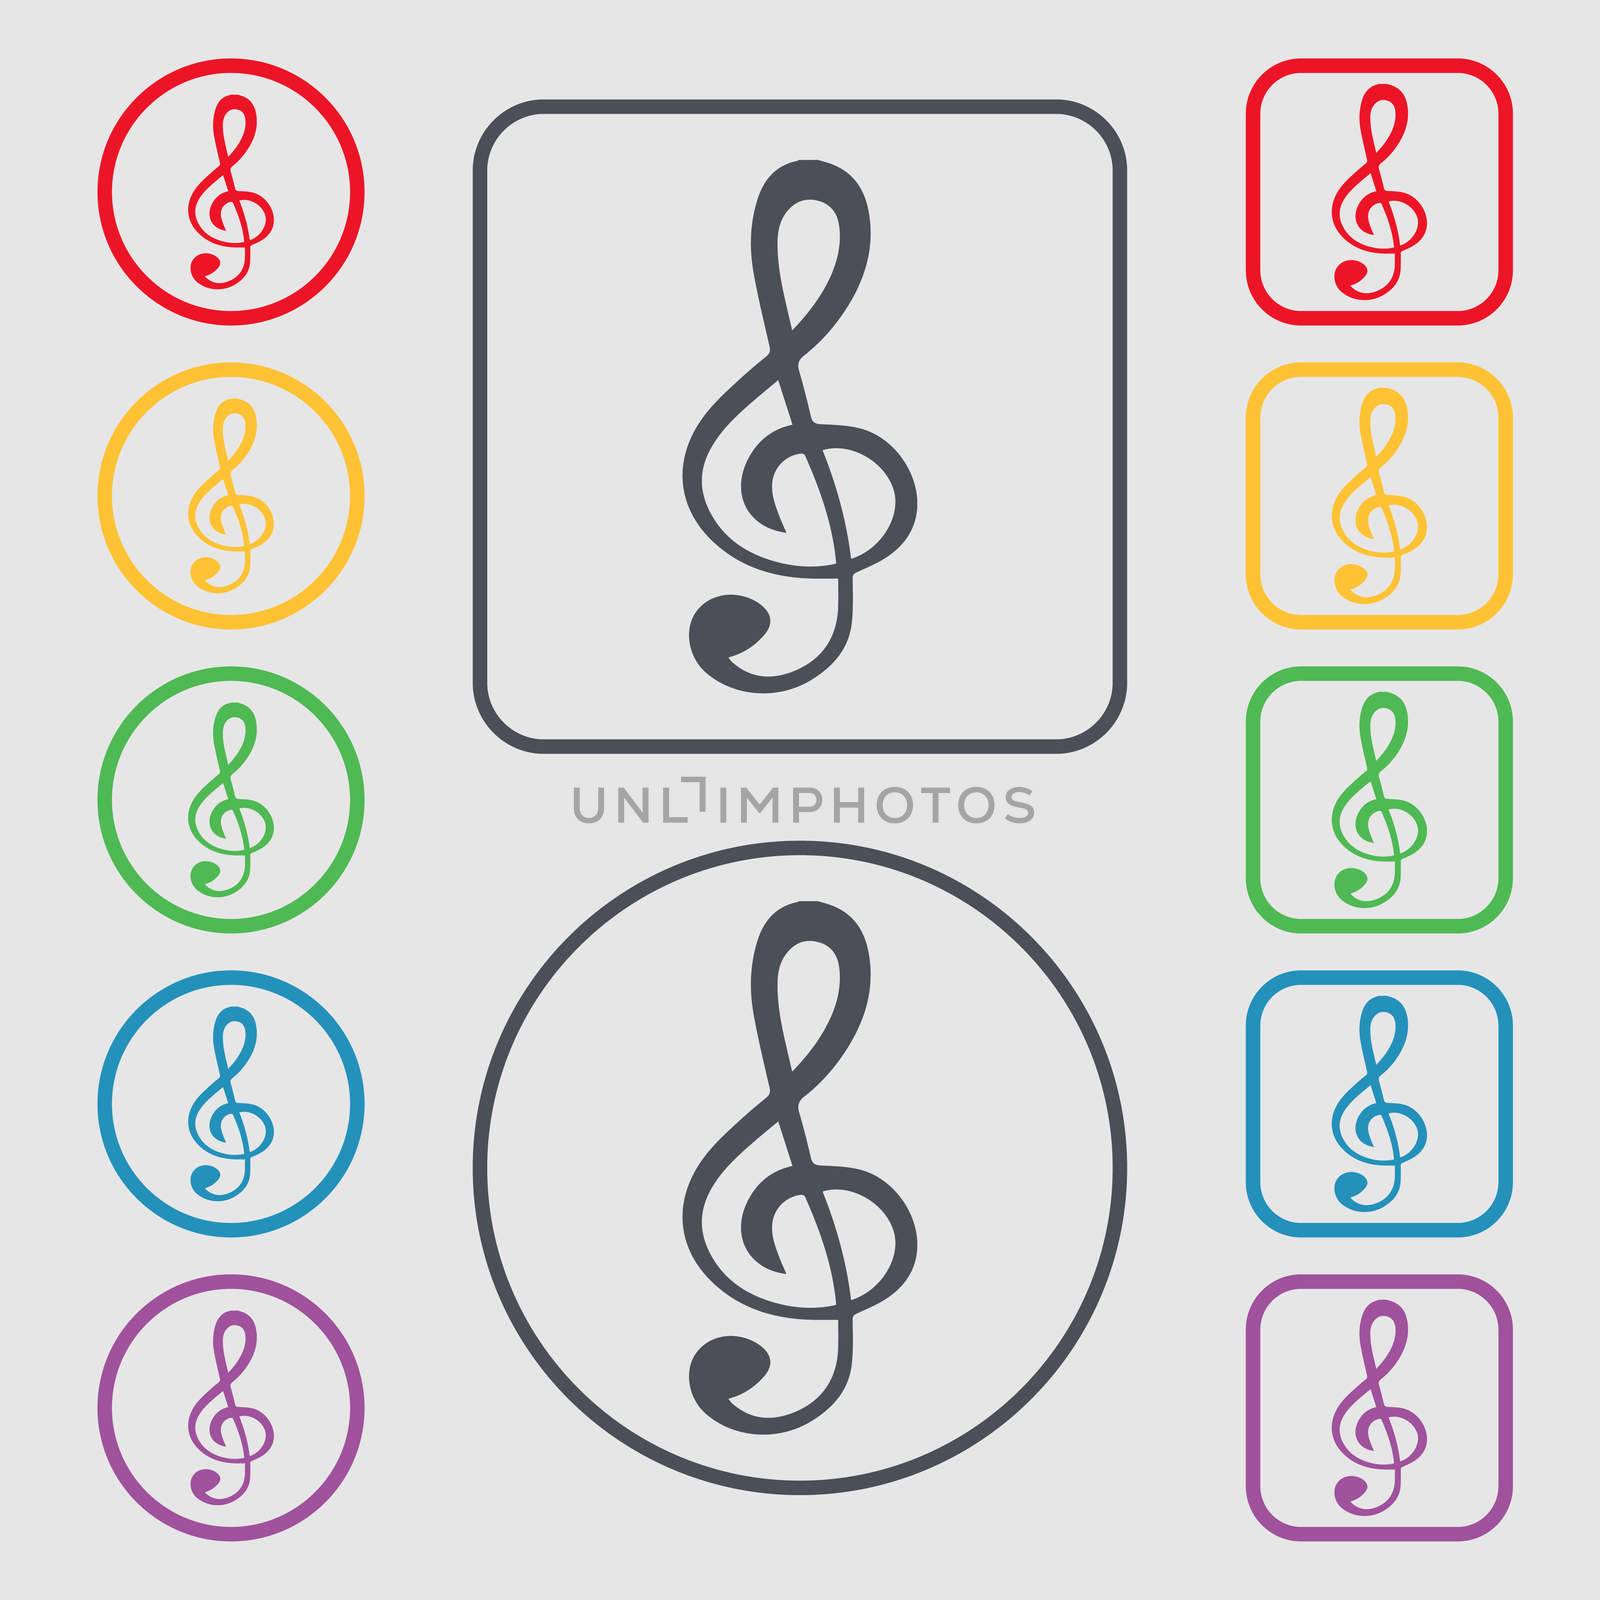 treble clef icon. Symbols on the Round and square buttons with frame. illustration